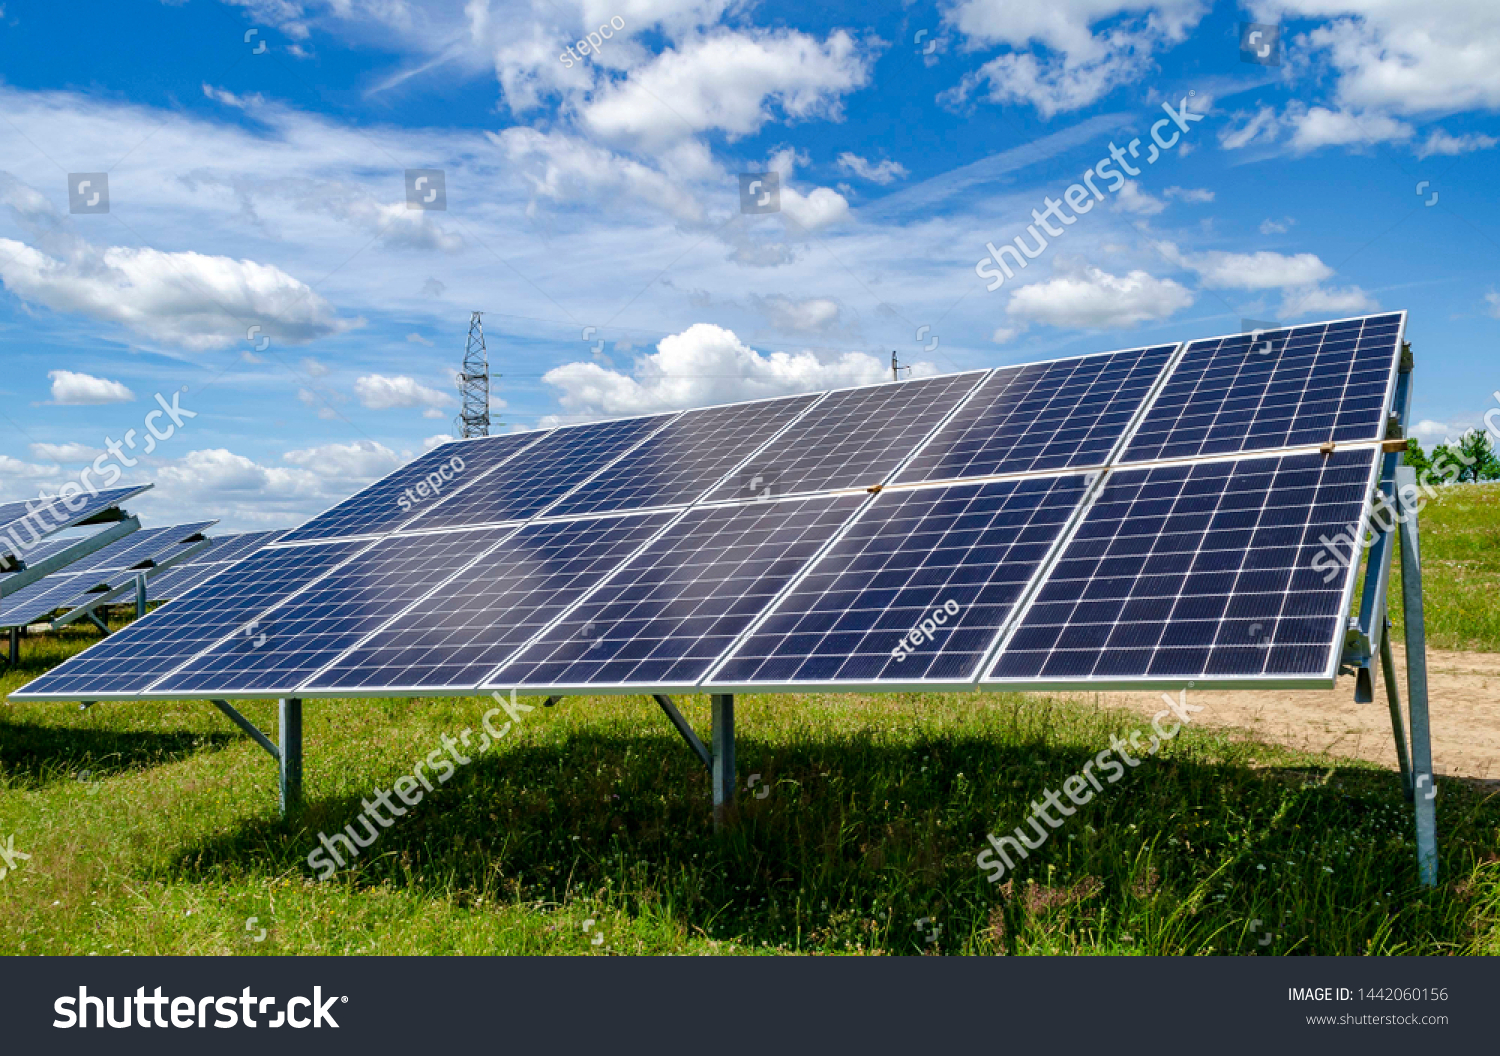 solar panel solar panels, blue sky with white clouds
 #1442060156